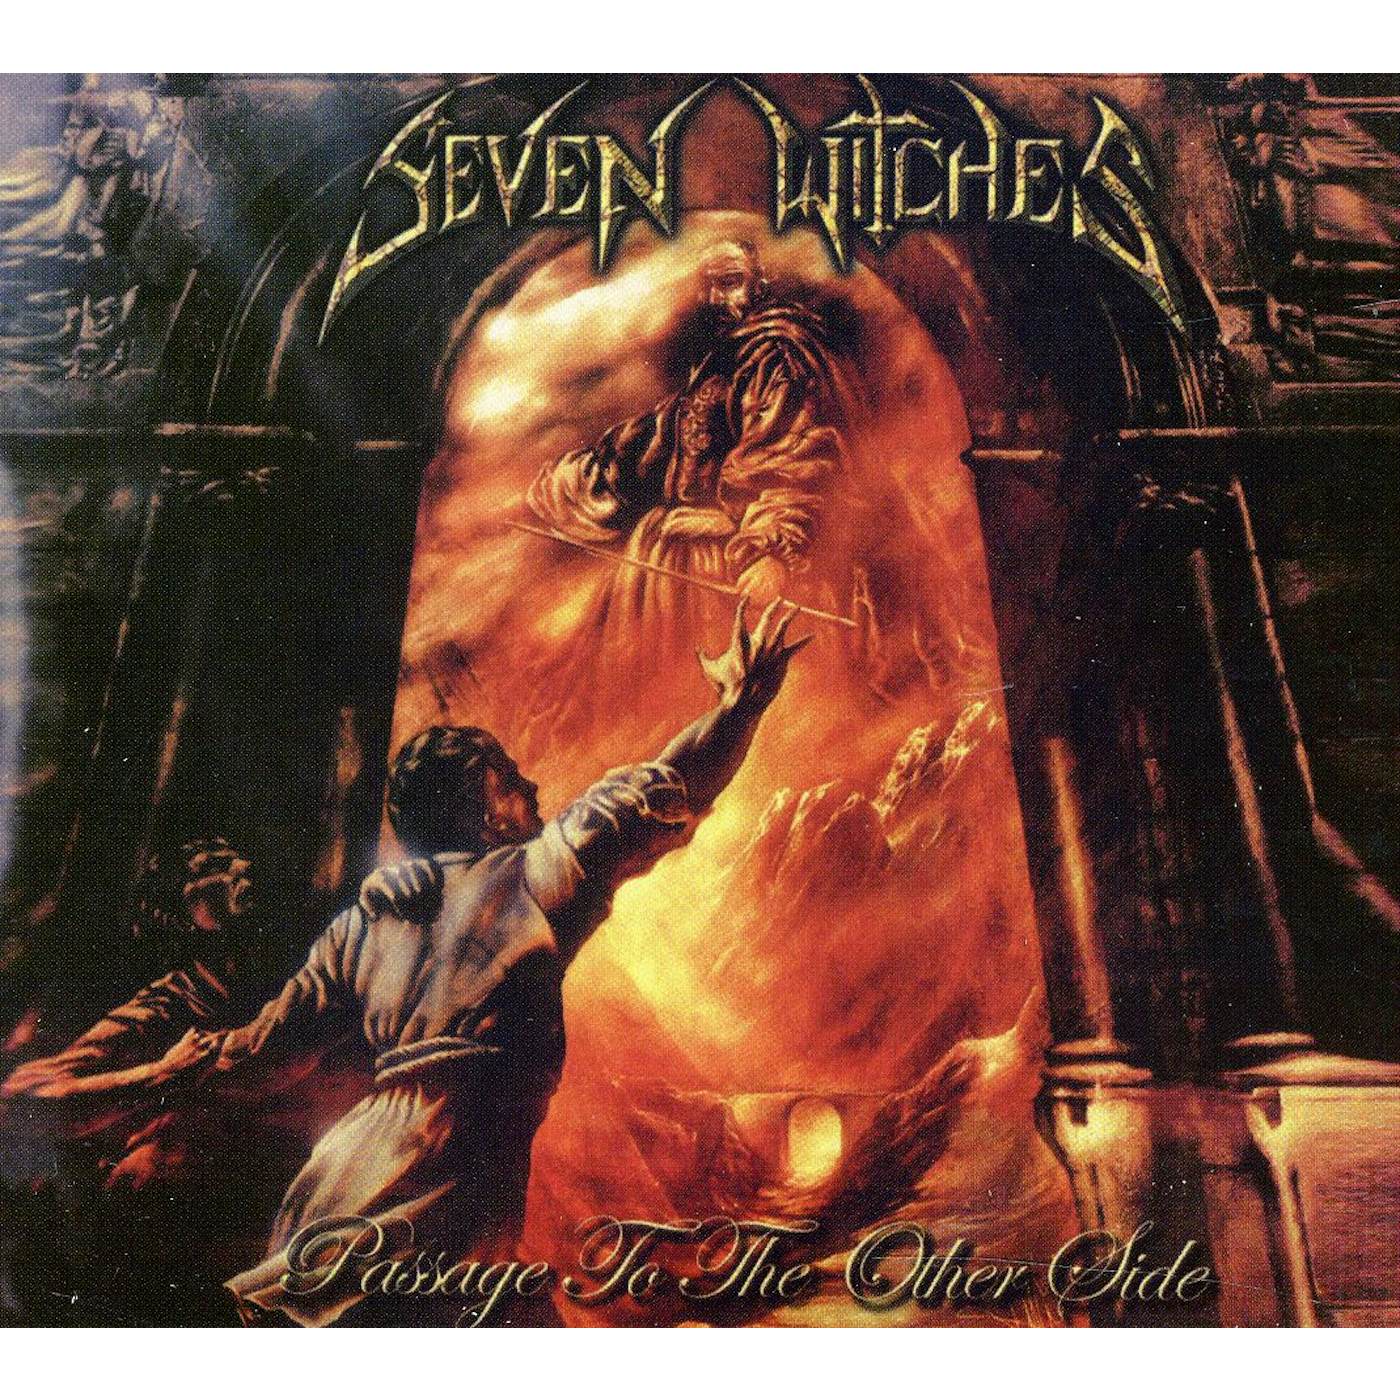 Seven Witches PASSAGE TO THE OTHER SIDE CD